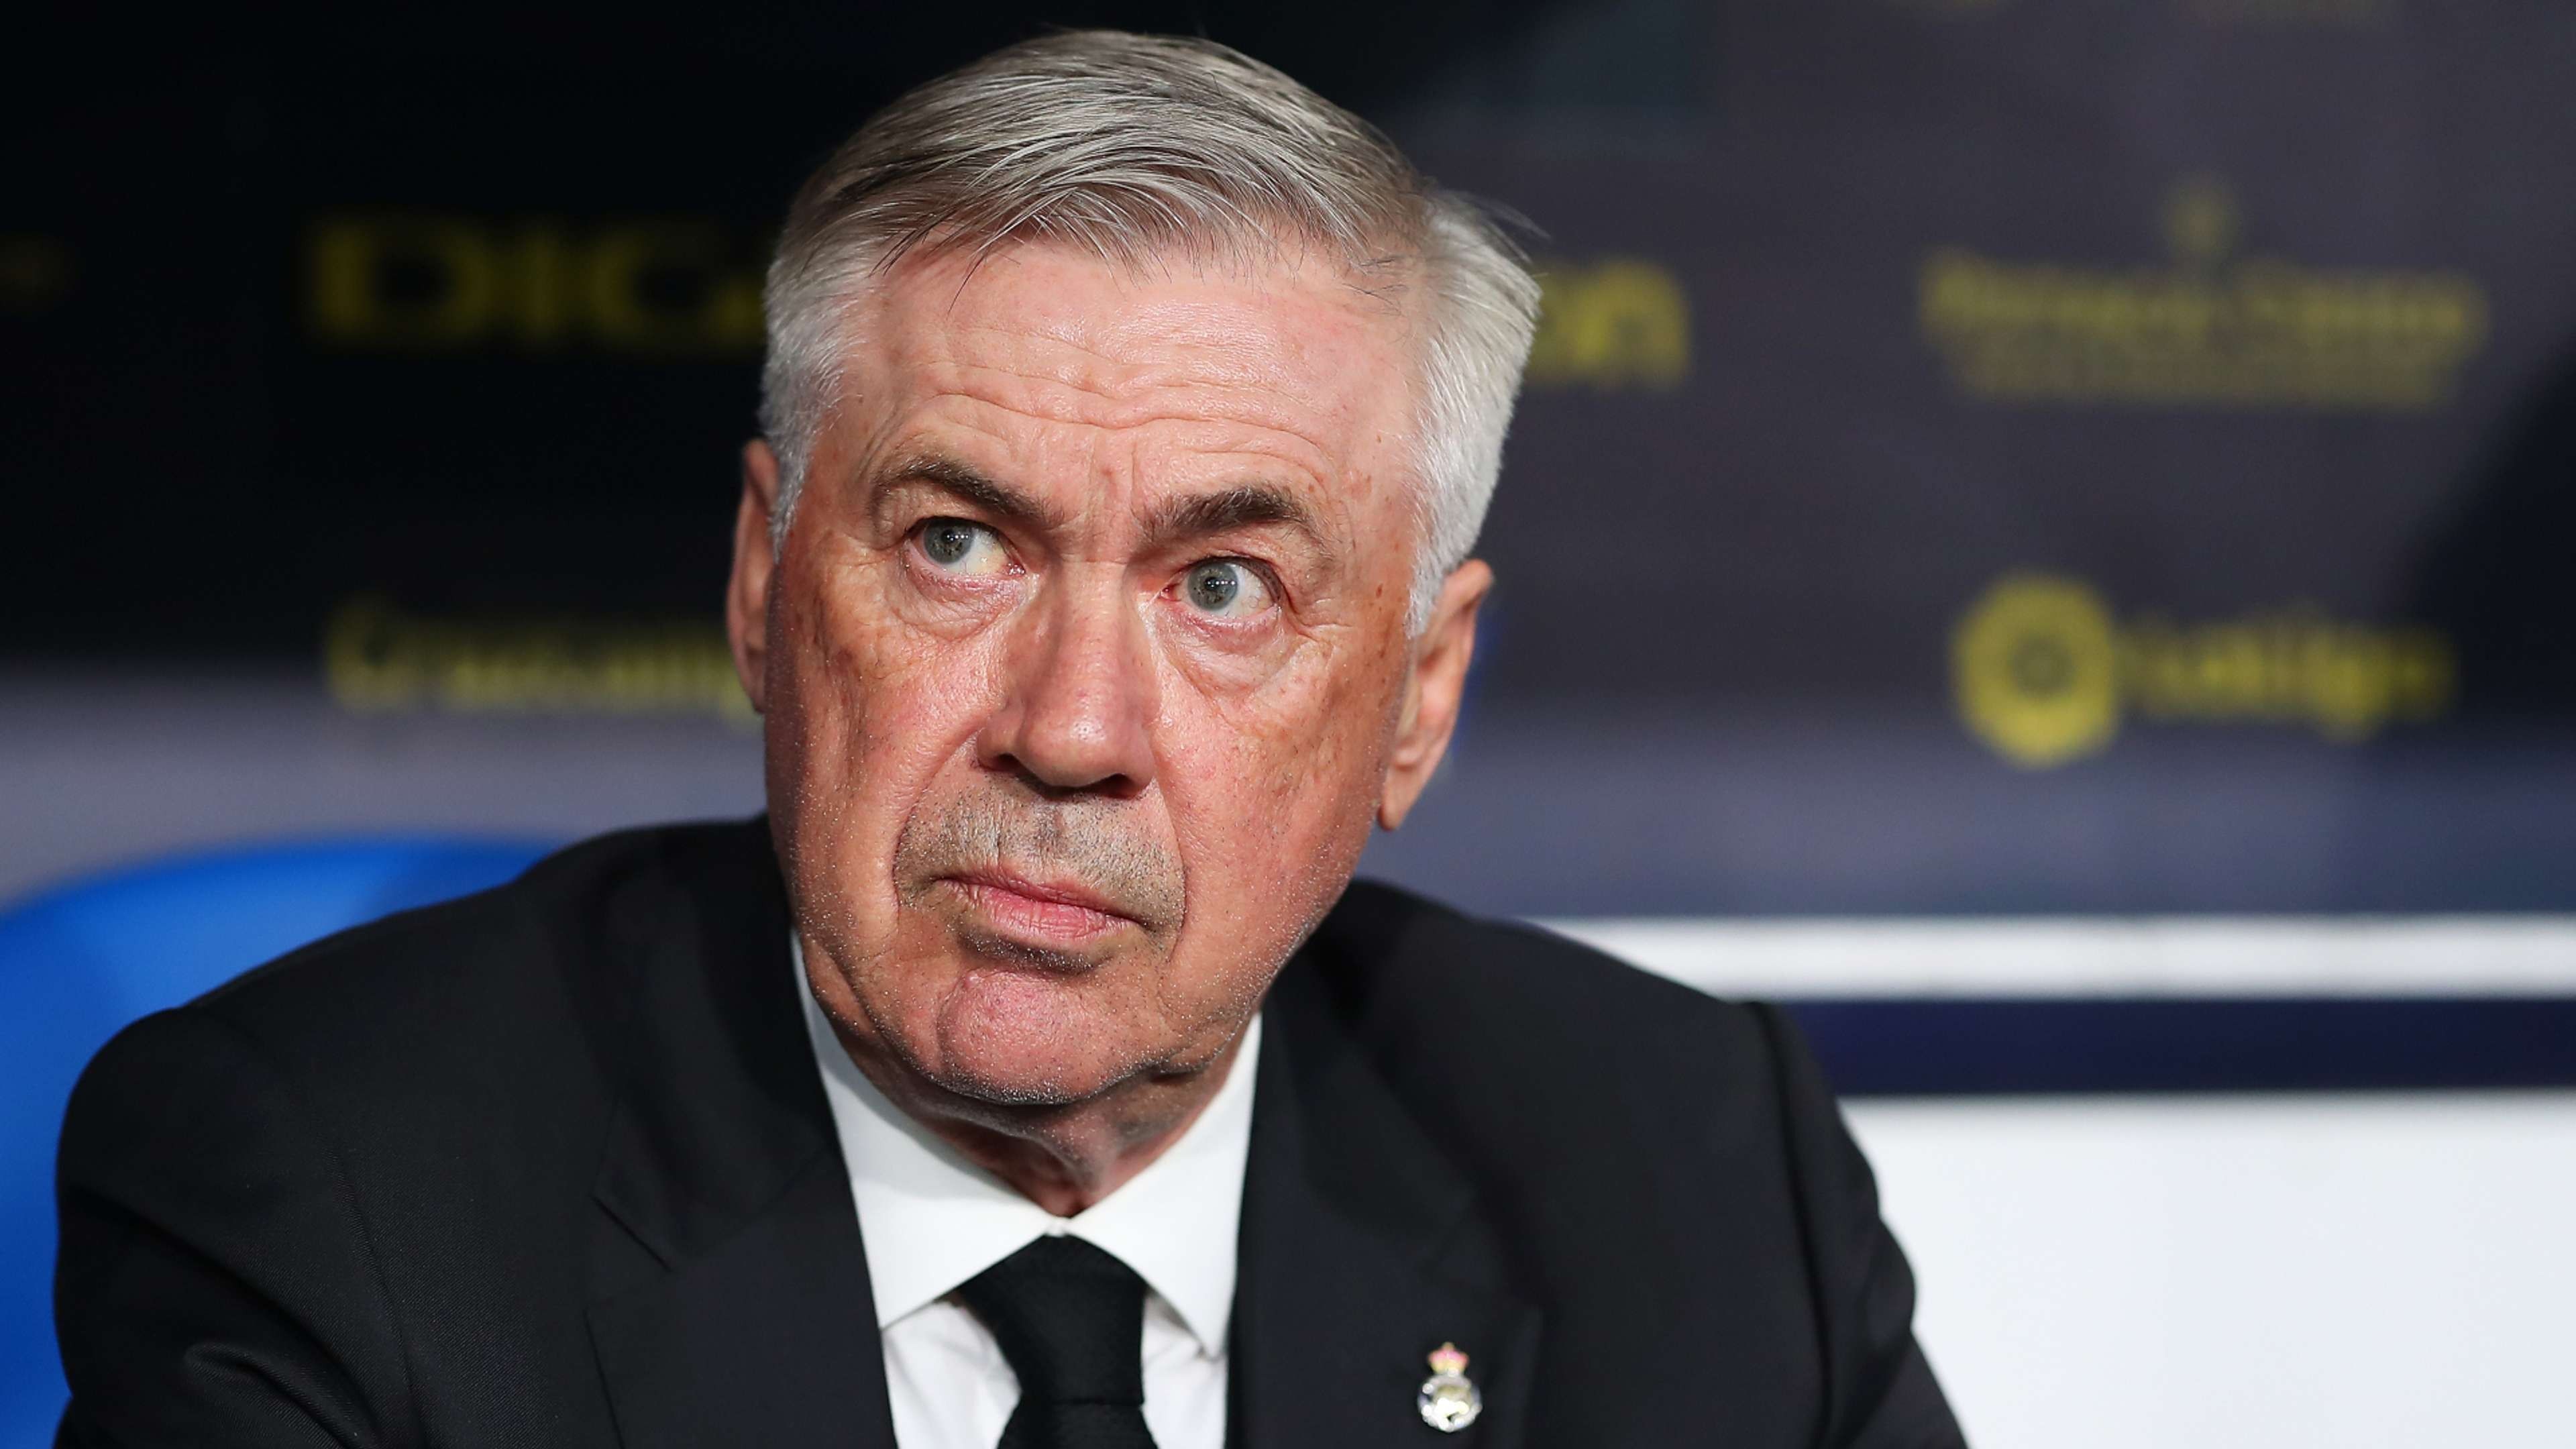  Ancelotti Surpasses Zidane In Number Of Trophies As Real Madrid Head Coach